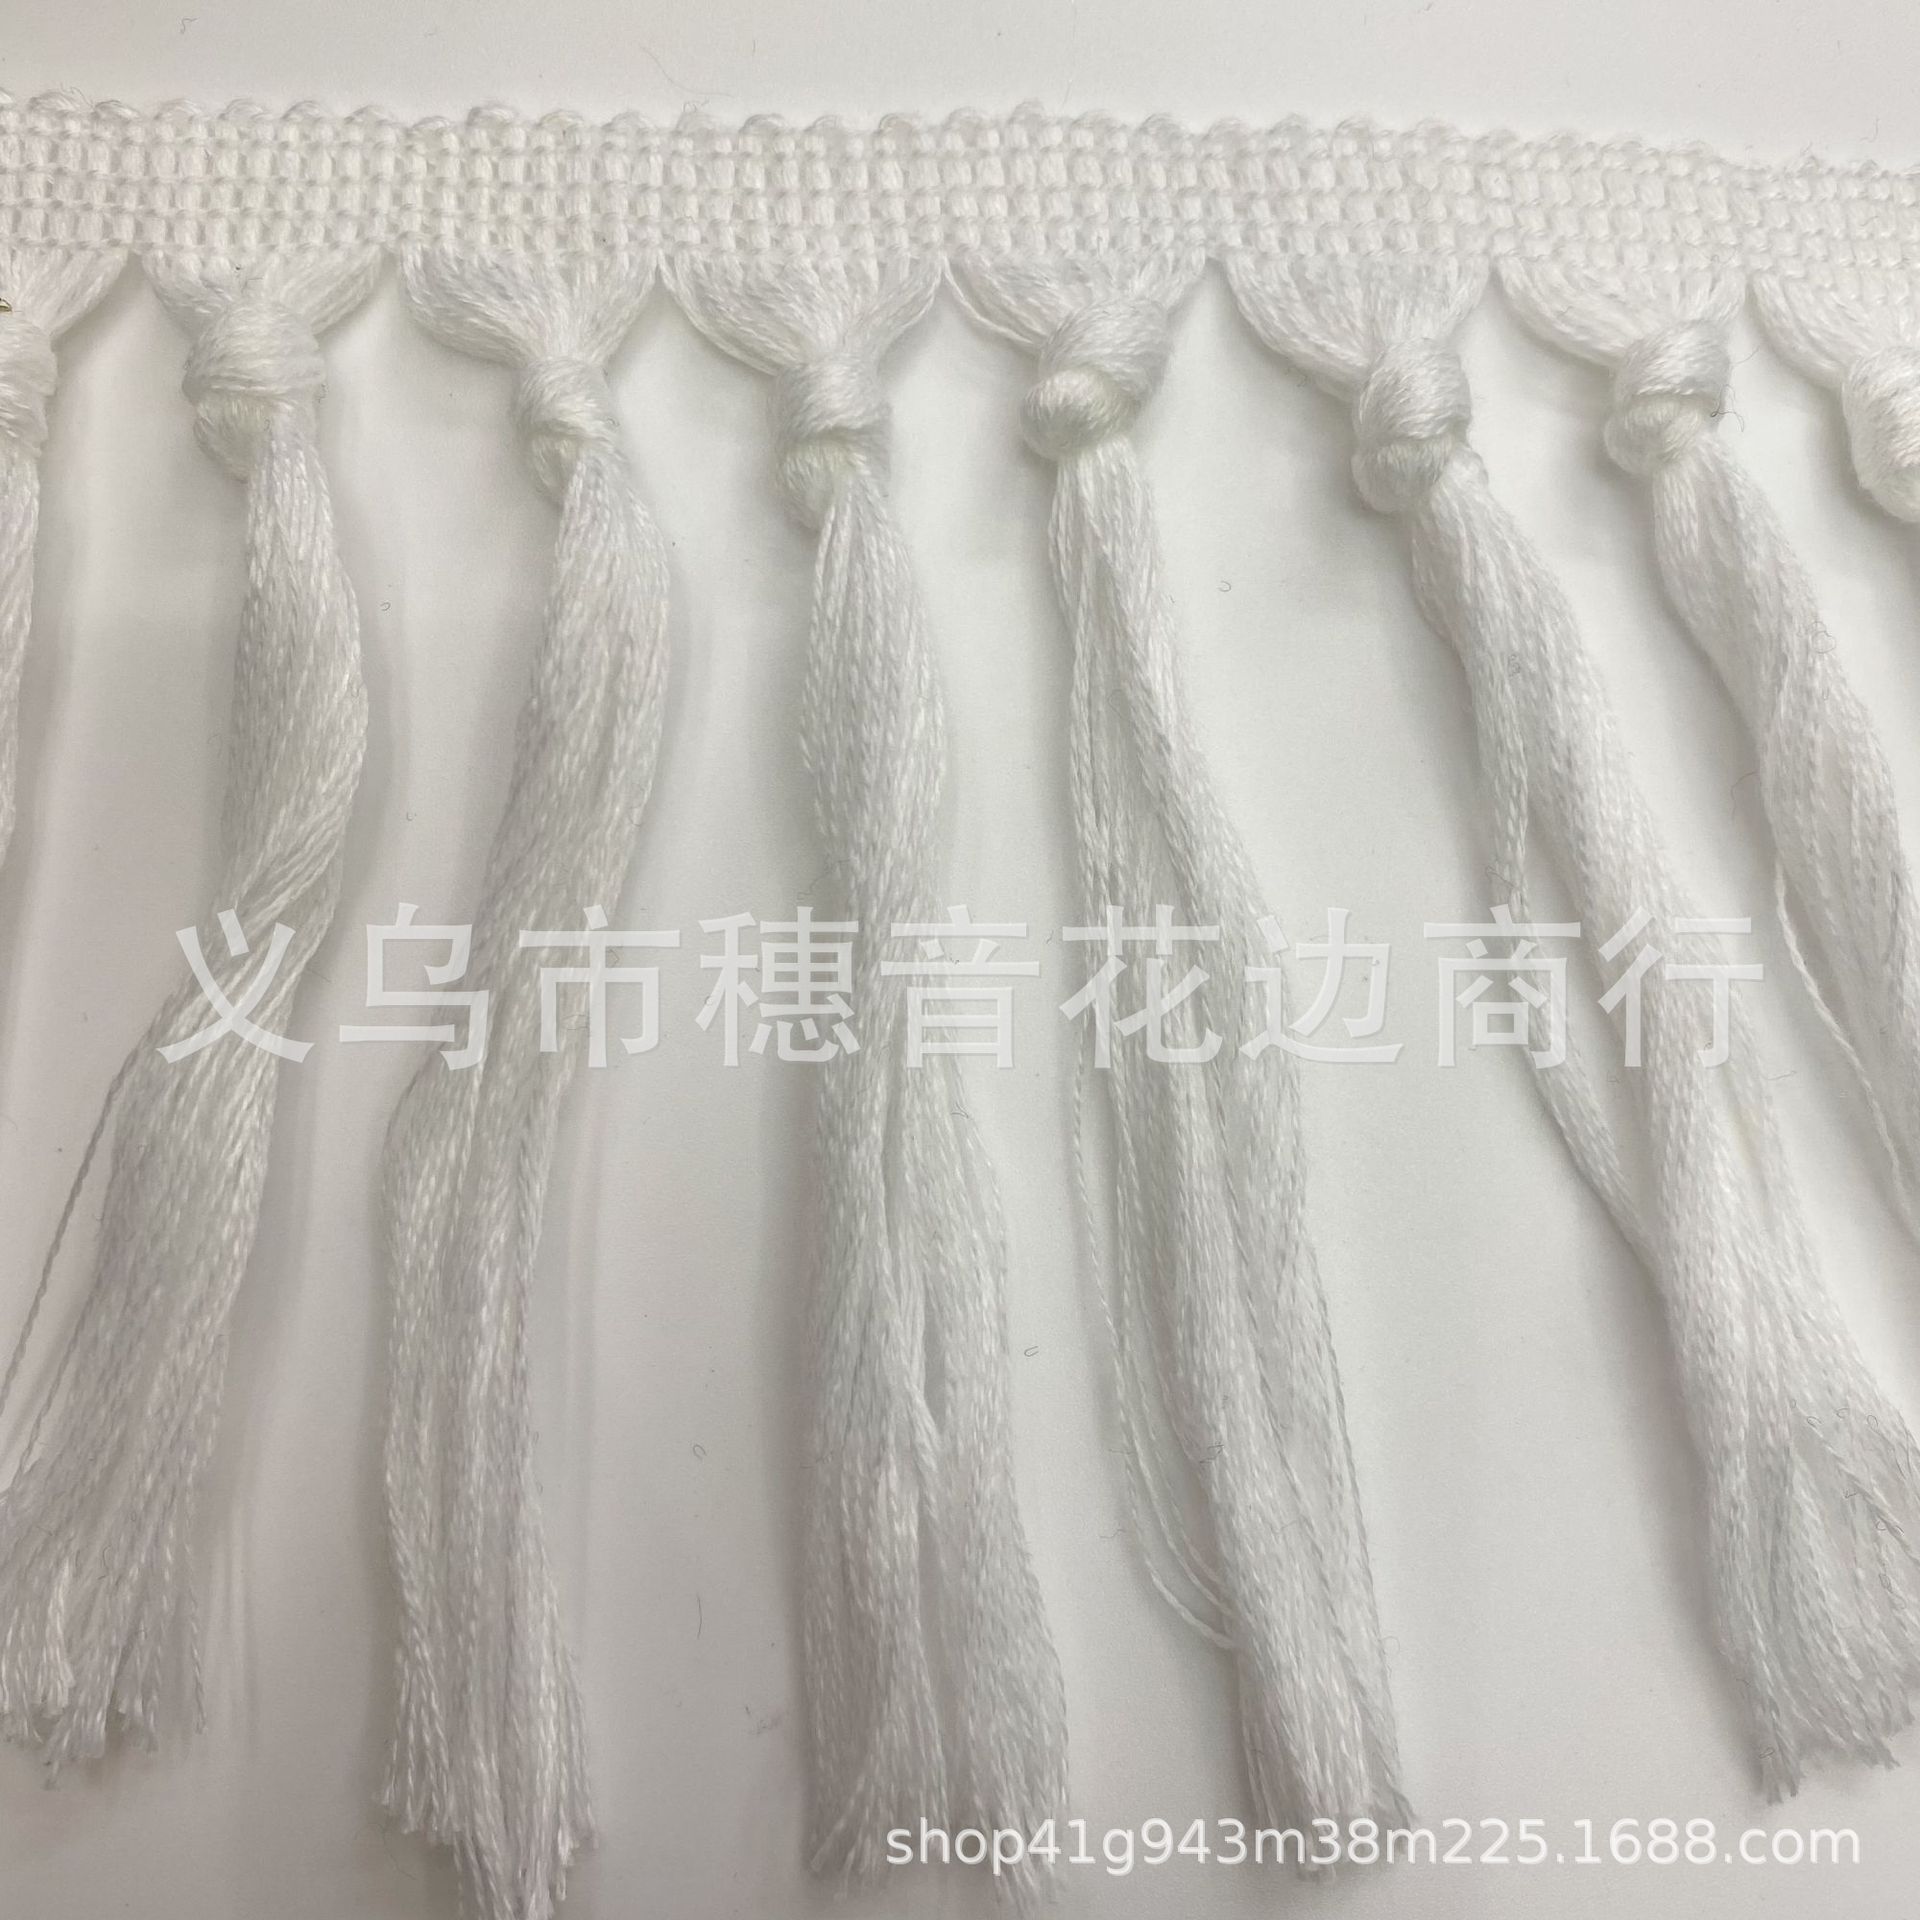 source manufacturers supply cotton fringe knotted lace scarf crafts bedding accessories lace